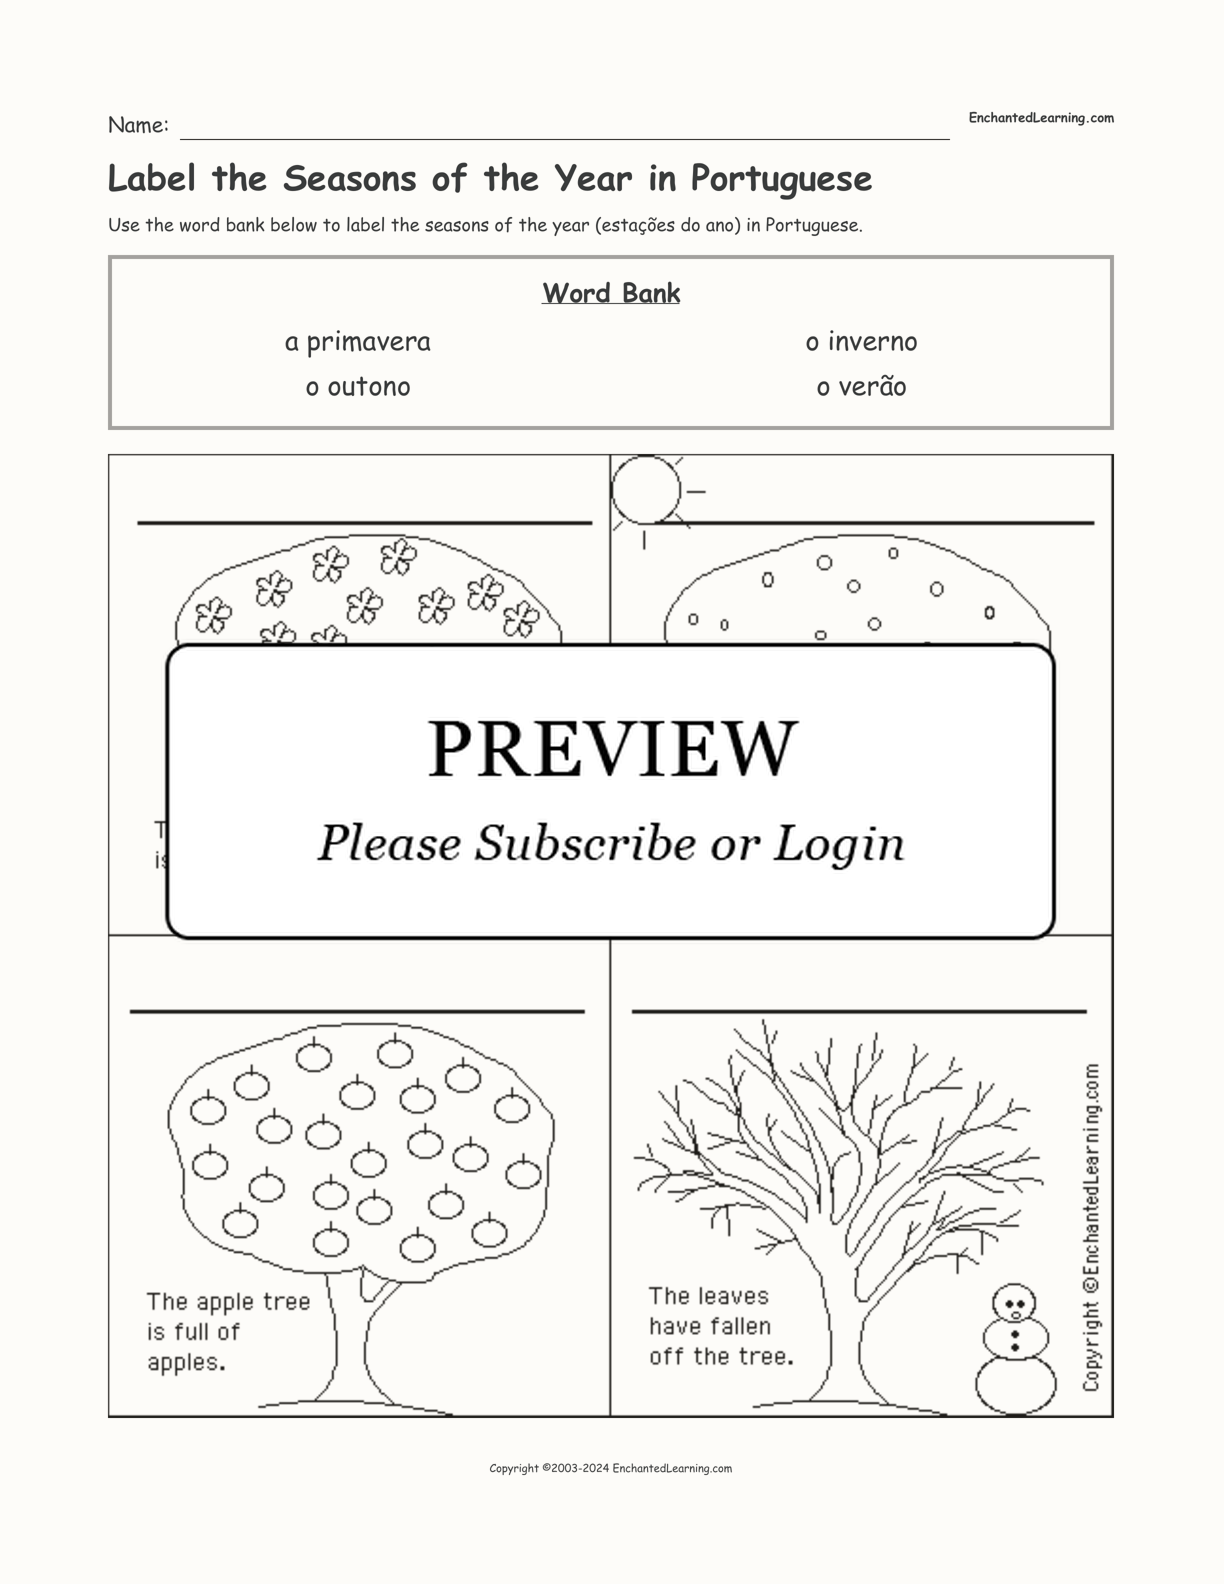 Label the Seasons of the Year in Portuguese interactive worksheet page 1